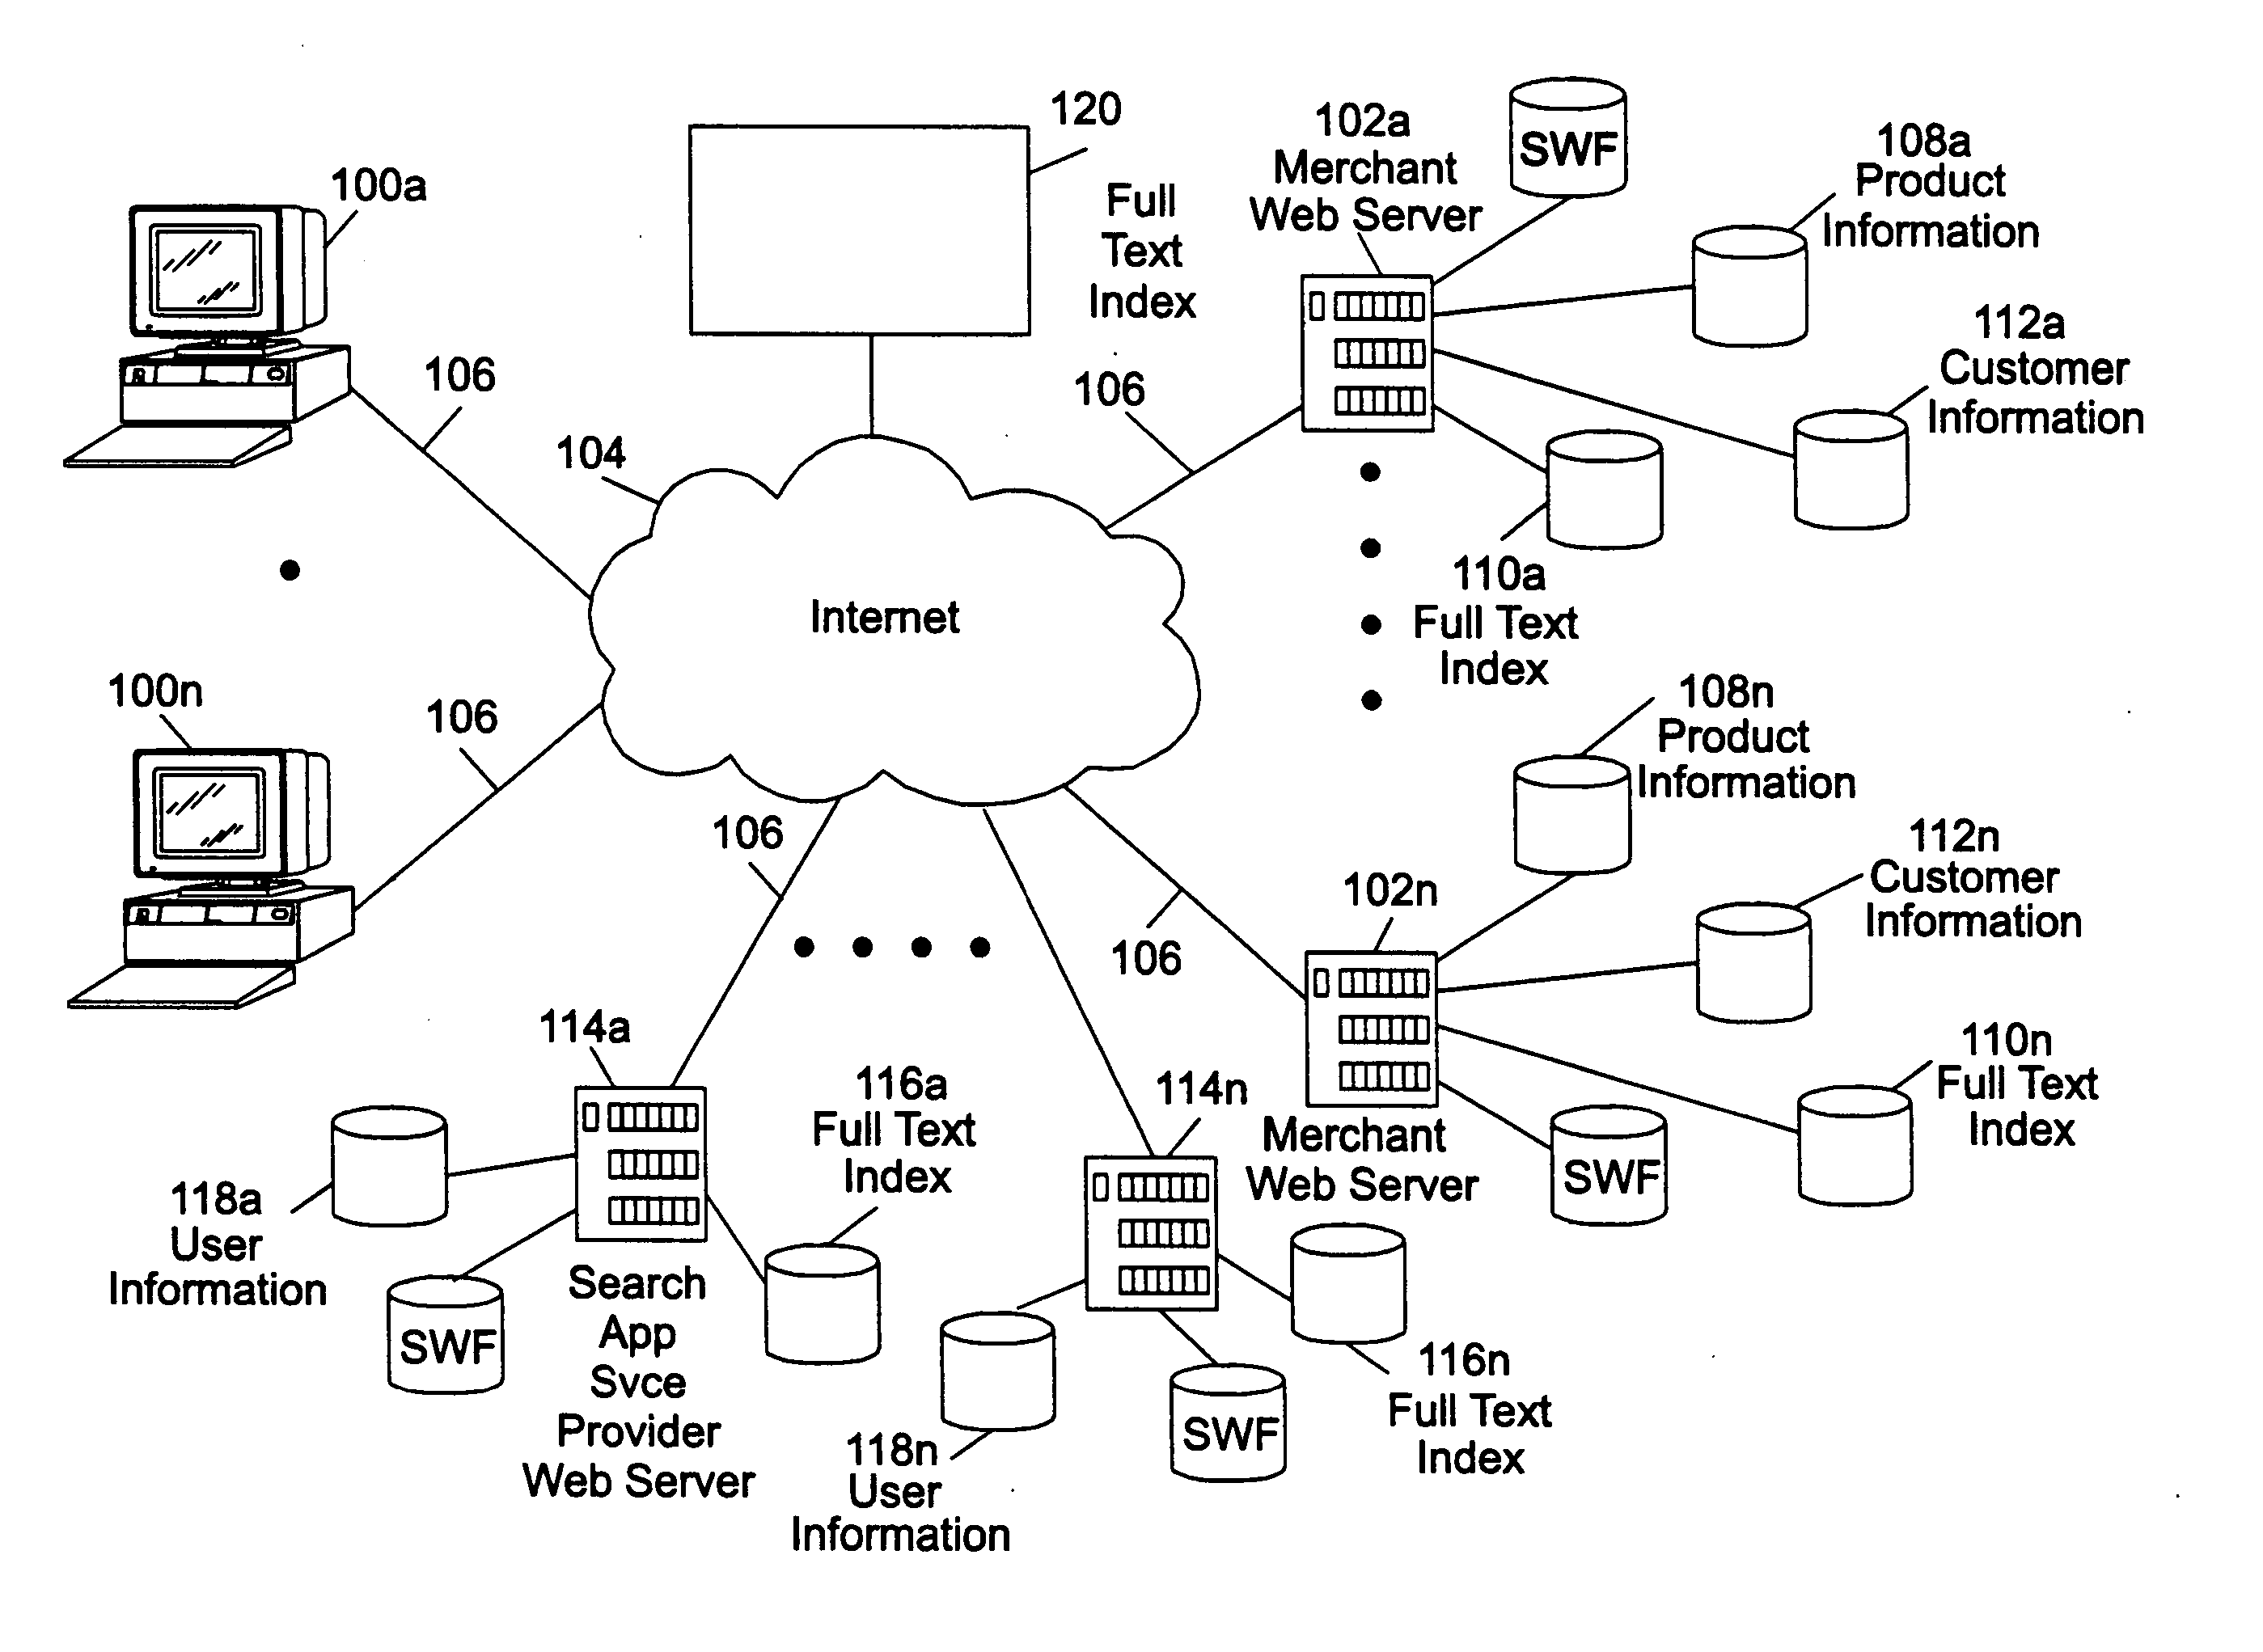 Method of securing access to IP LANs